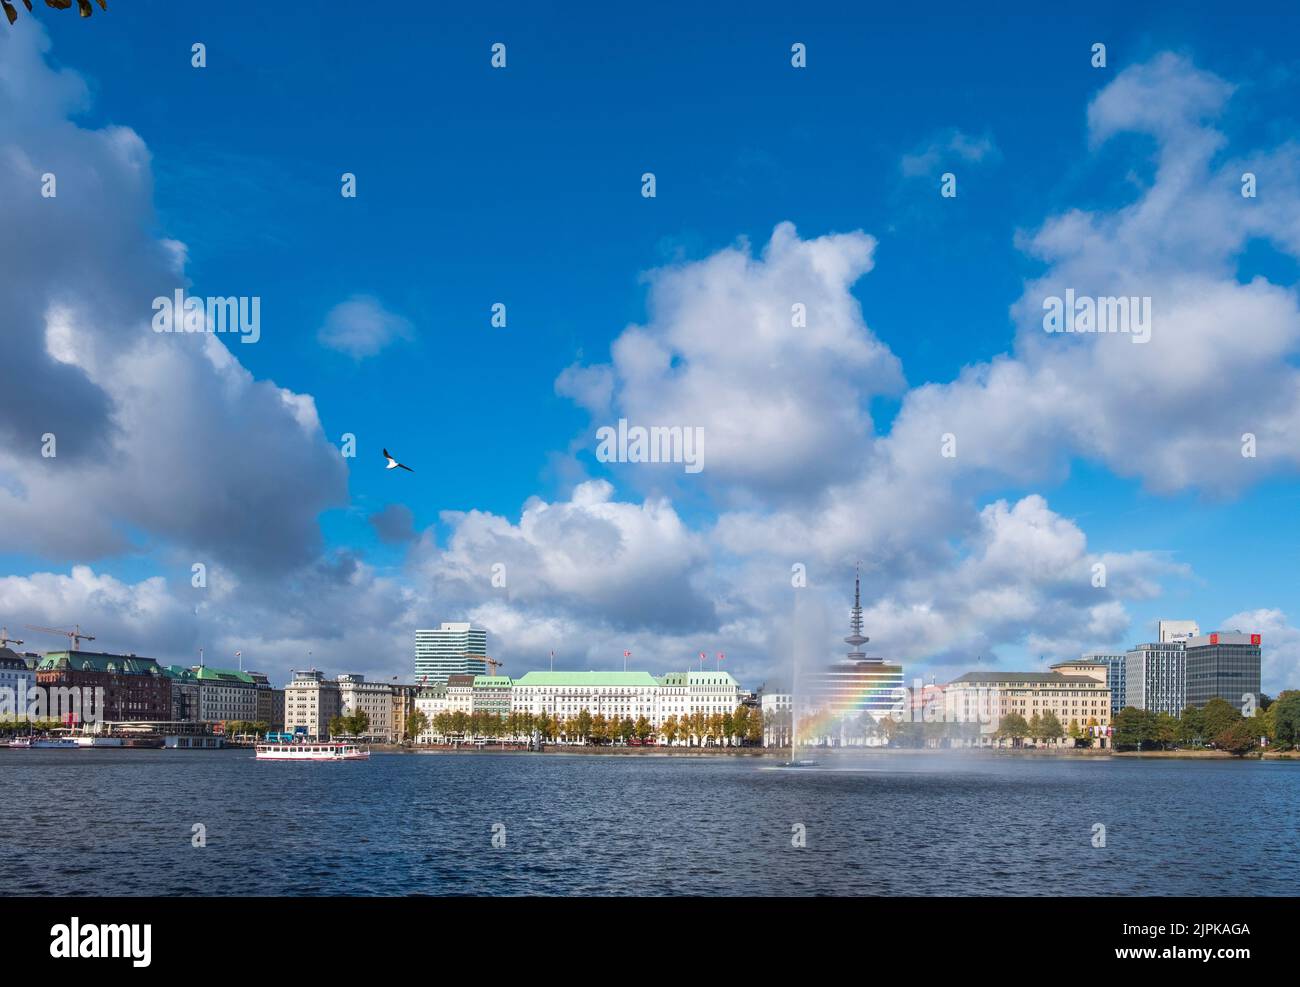 Television Tower, tour boat and Binnenalster Lake, Hamburg, Germany Stock Photo